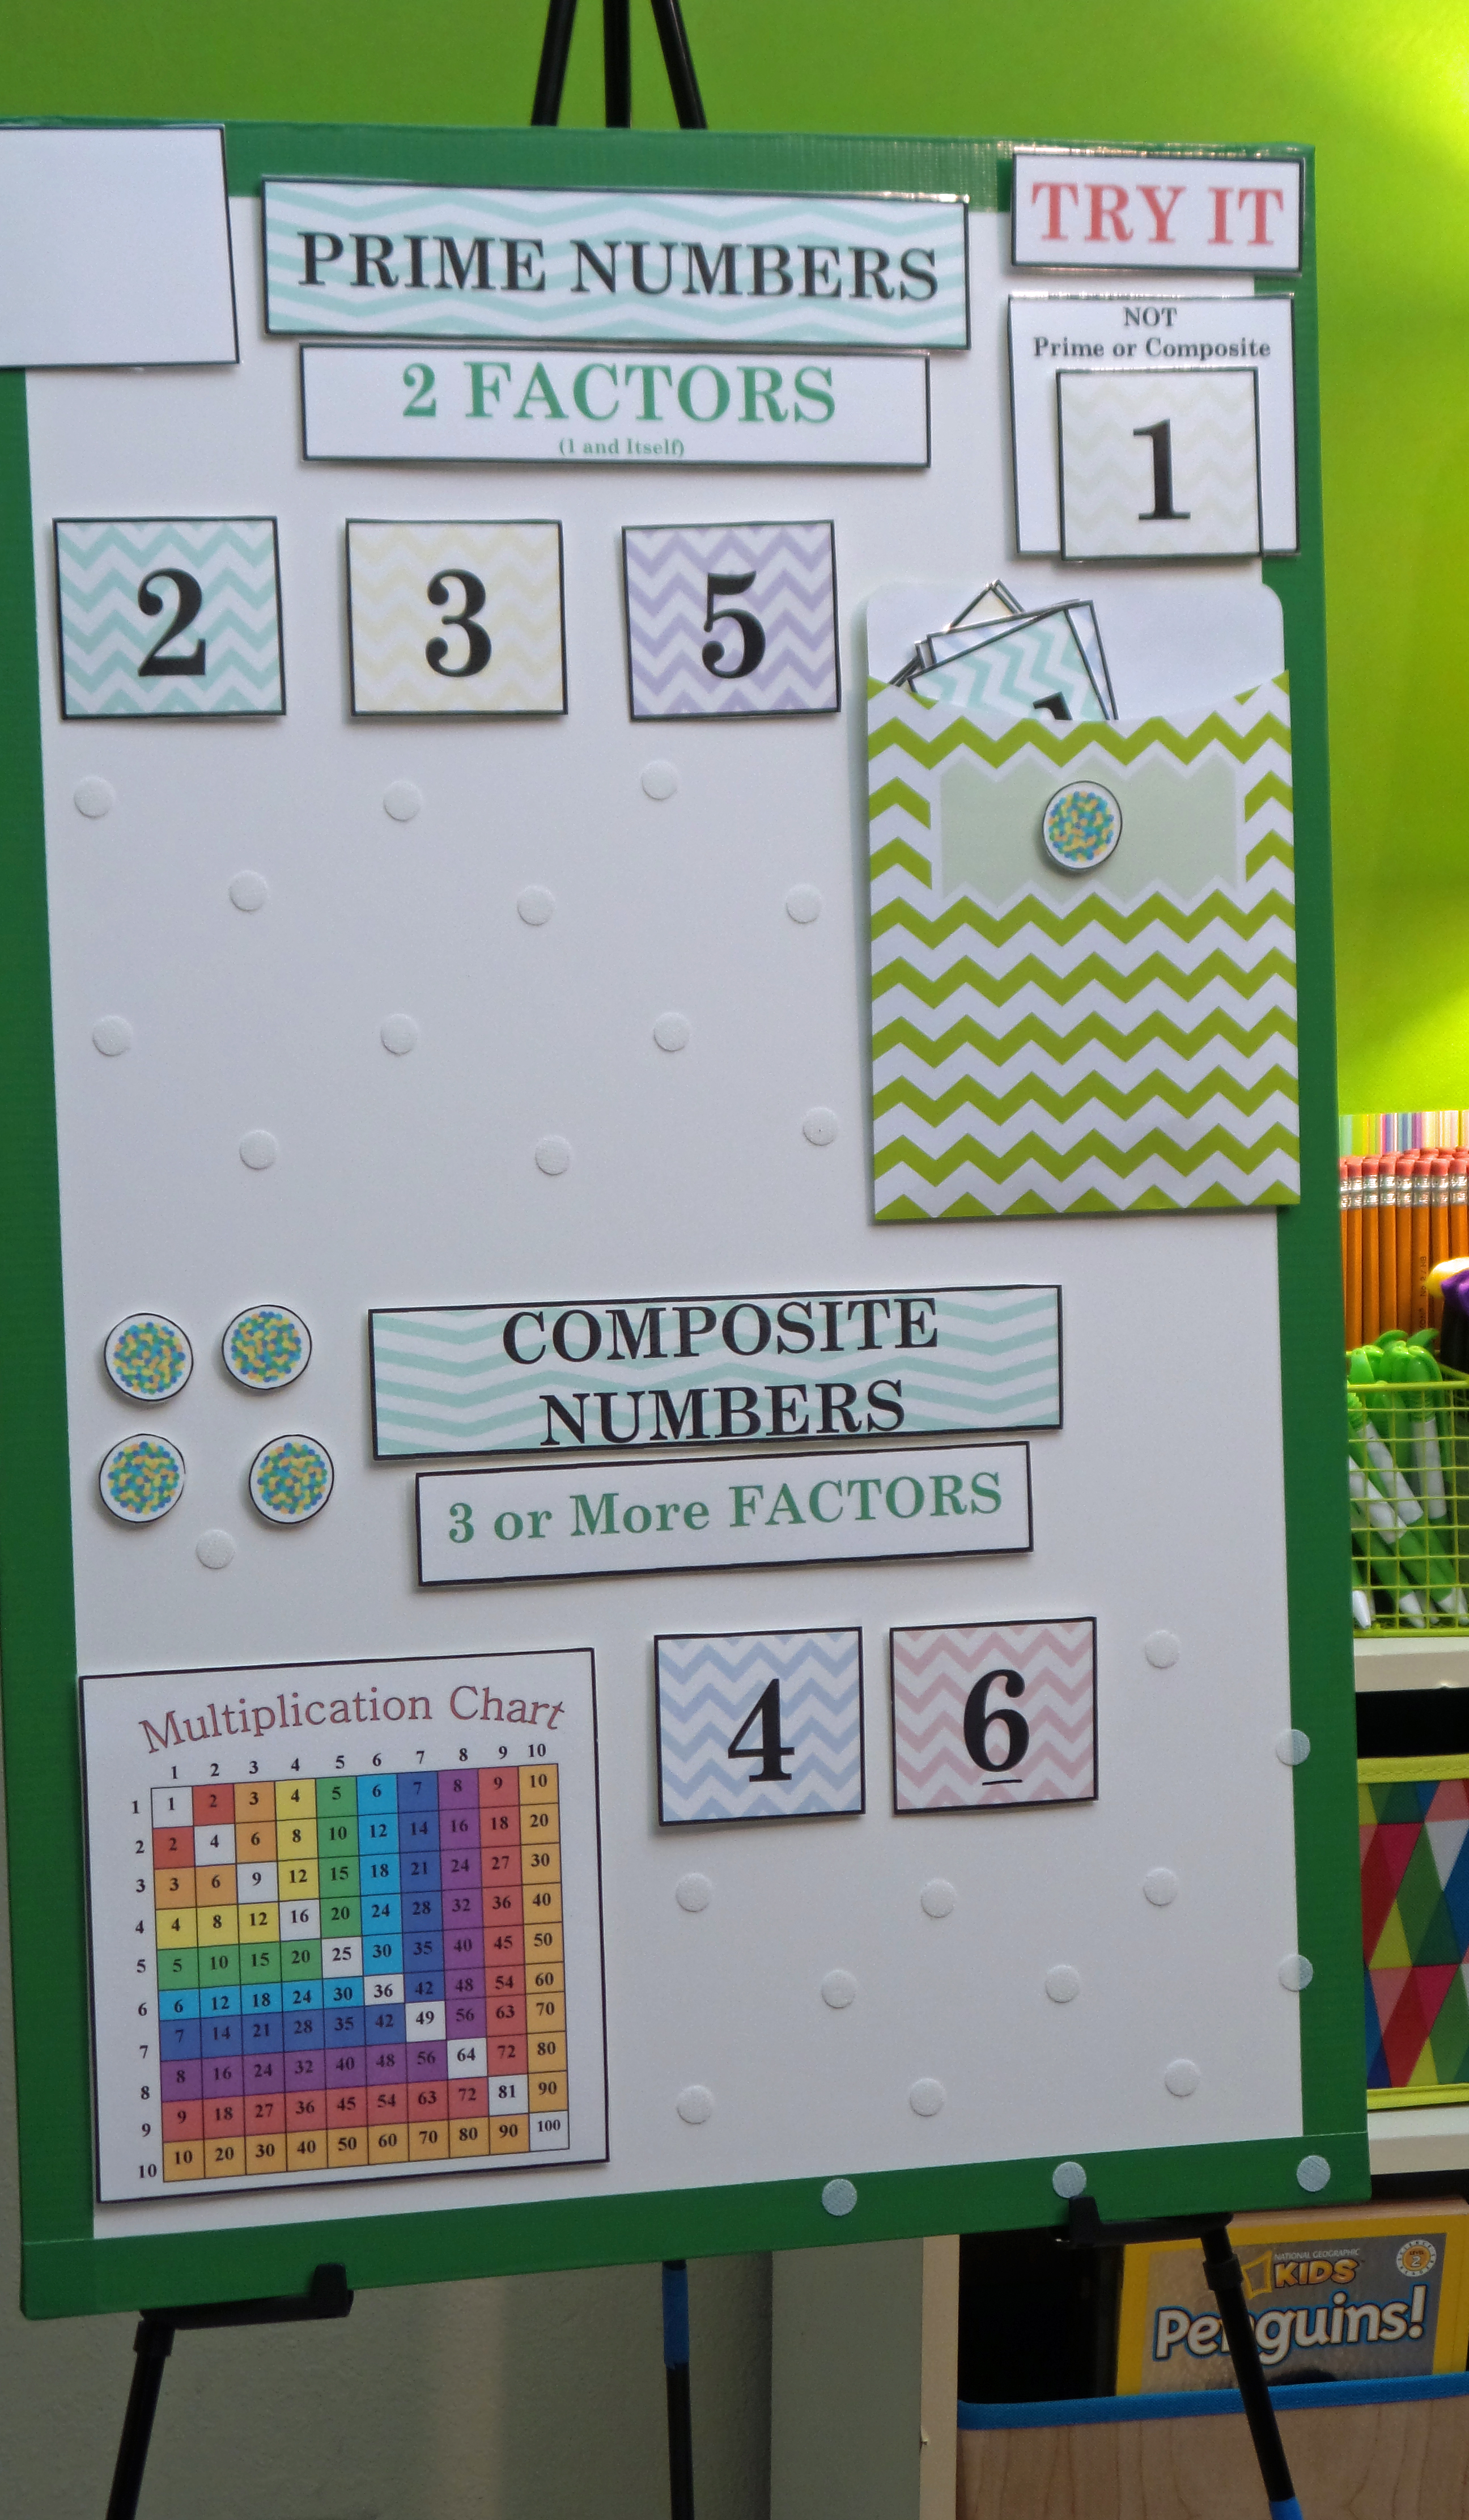 Prime And Composite Numbers Chart